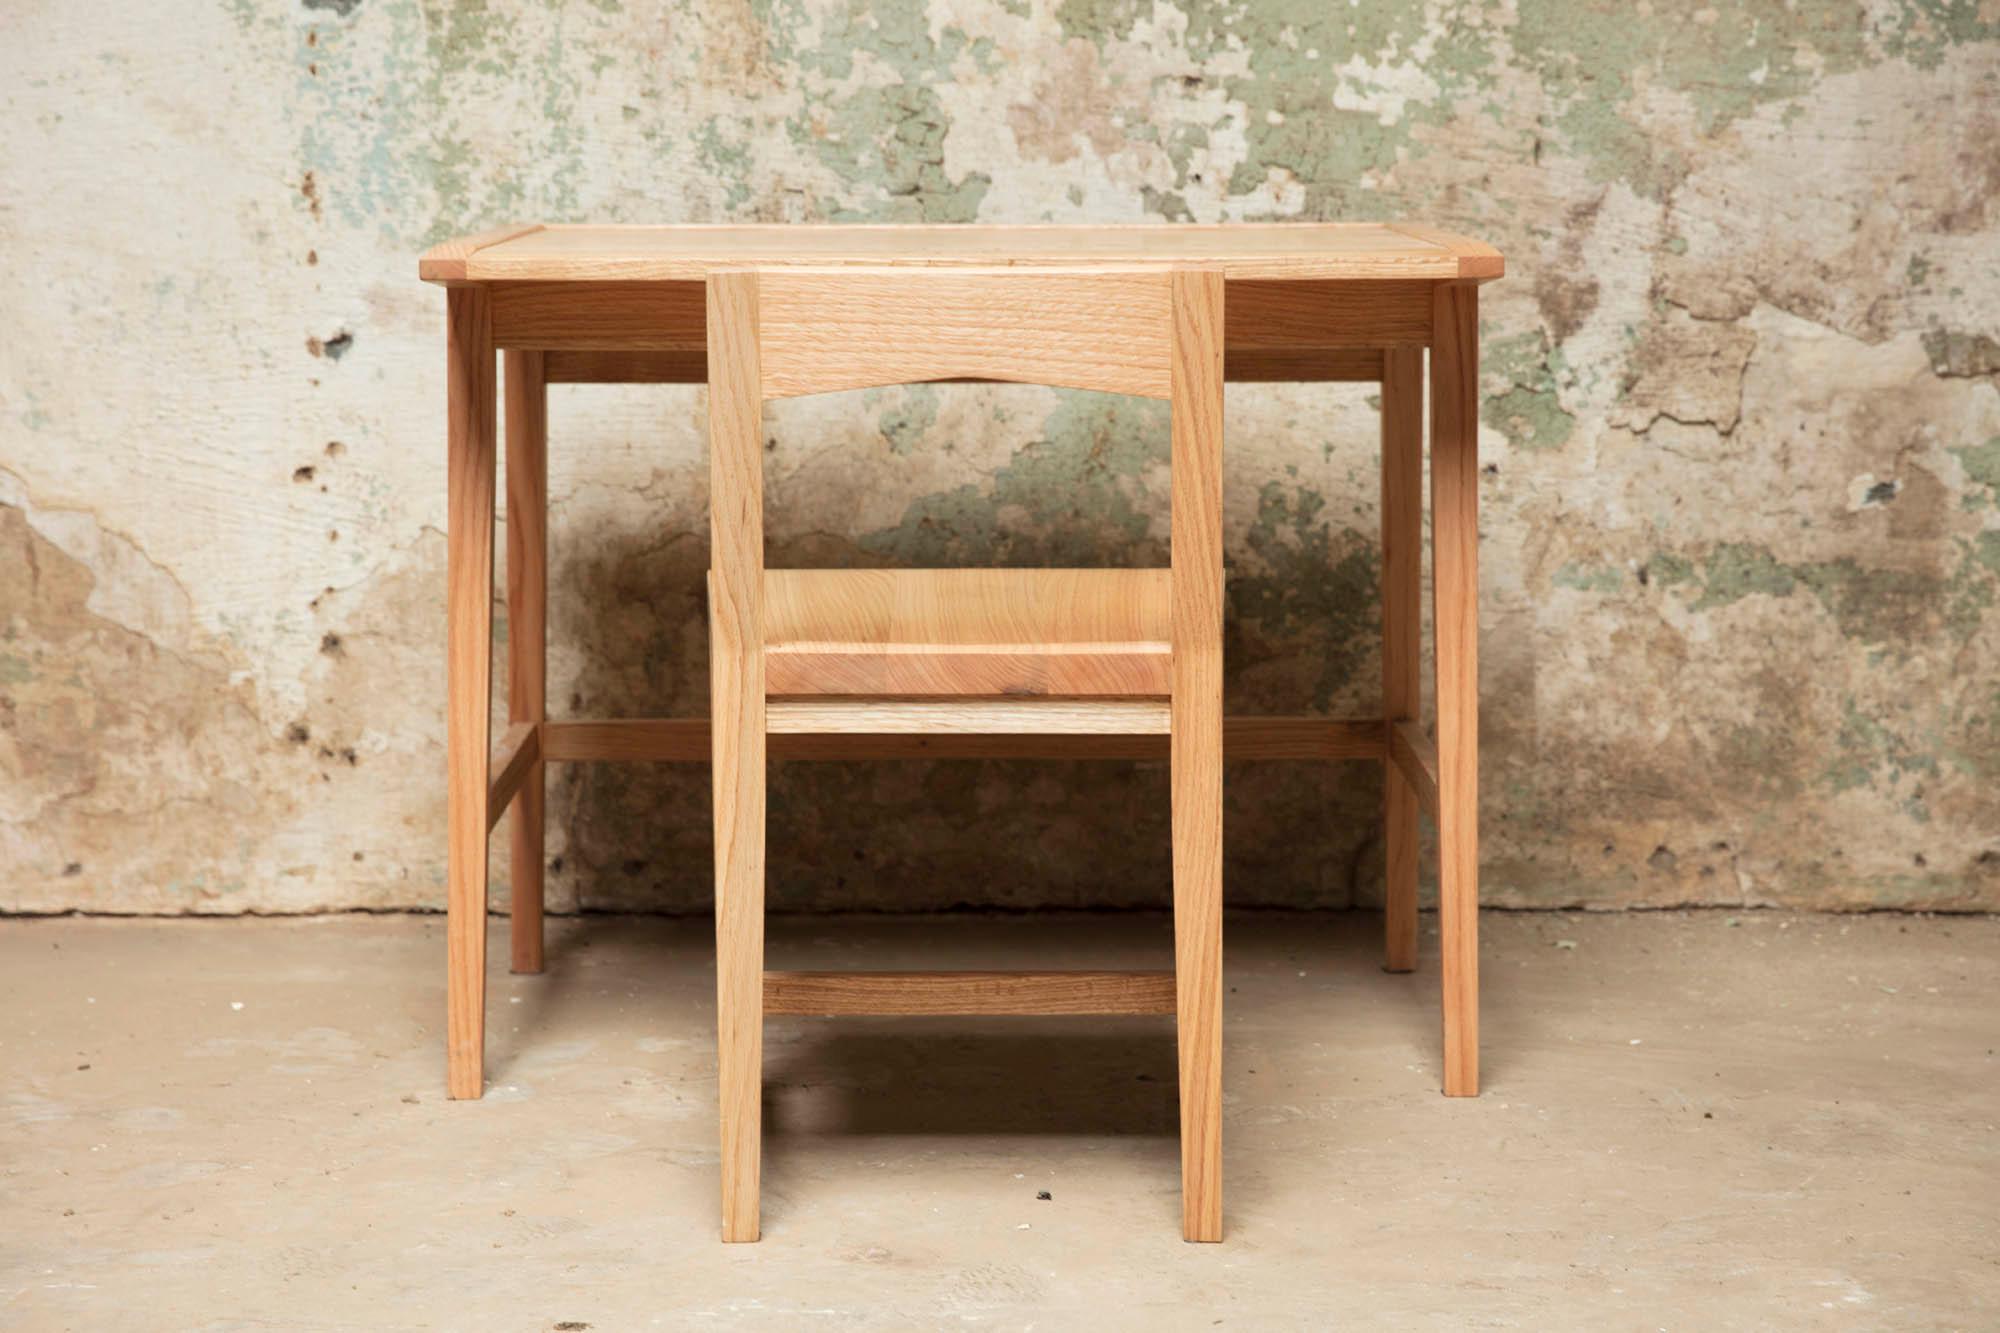 American Craftsman Writing or Computer Desk and Chair in Natural Oakwood by Alabama Sawyer